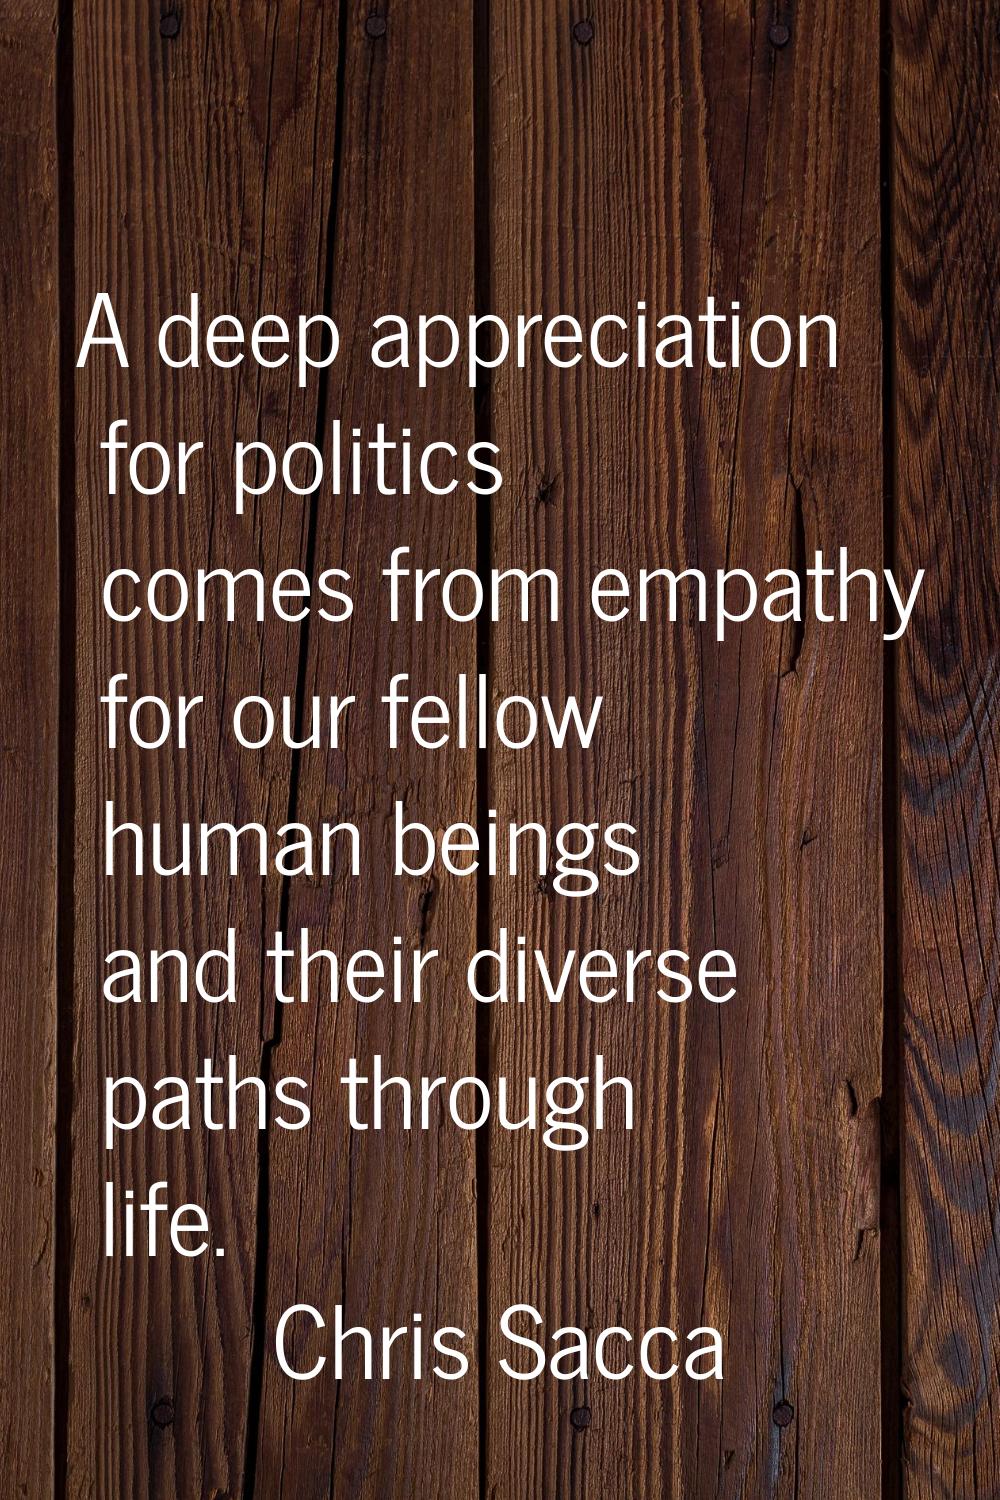 A deep appreciation for politics comes from empathy for our fellow human beings and their diverse p